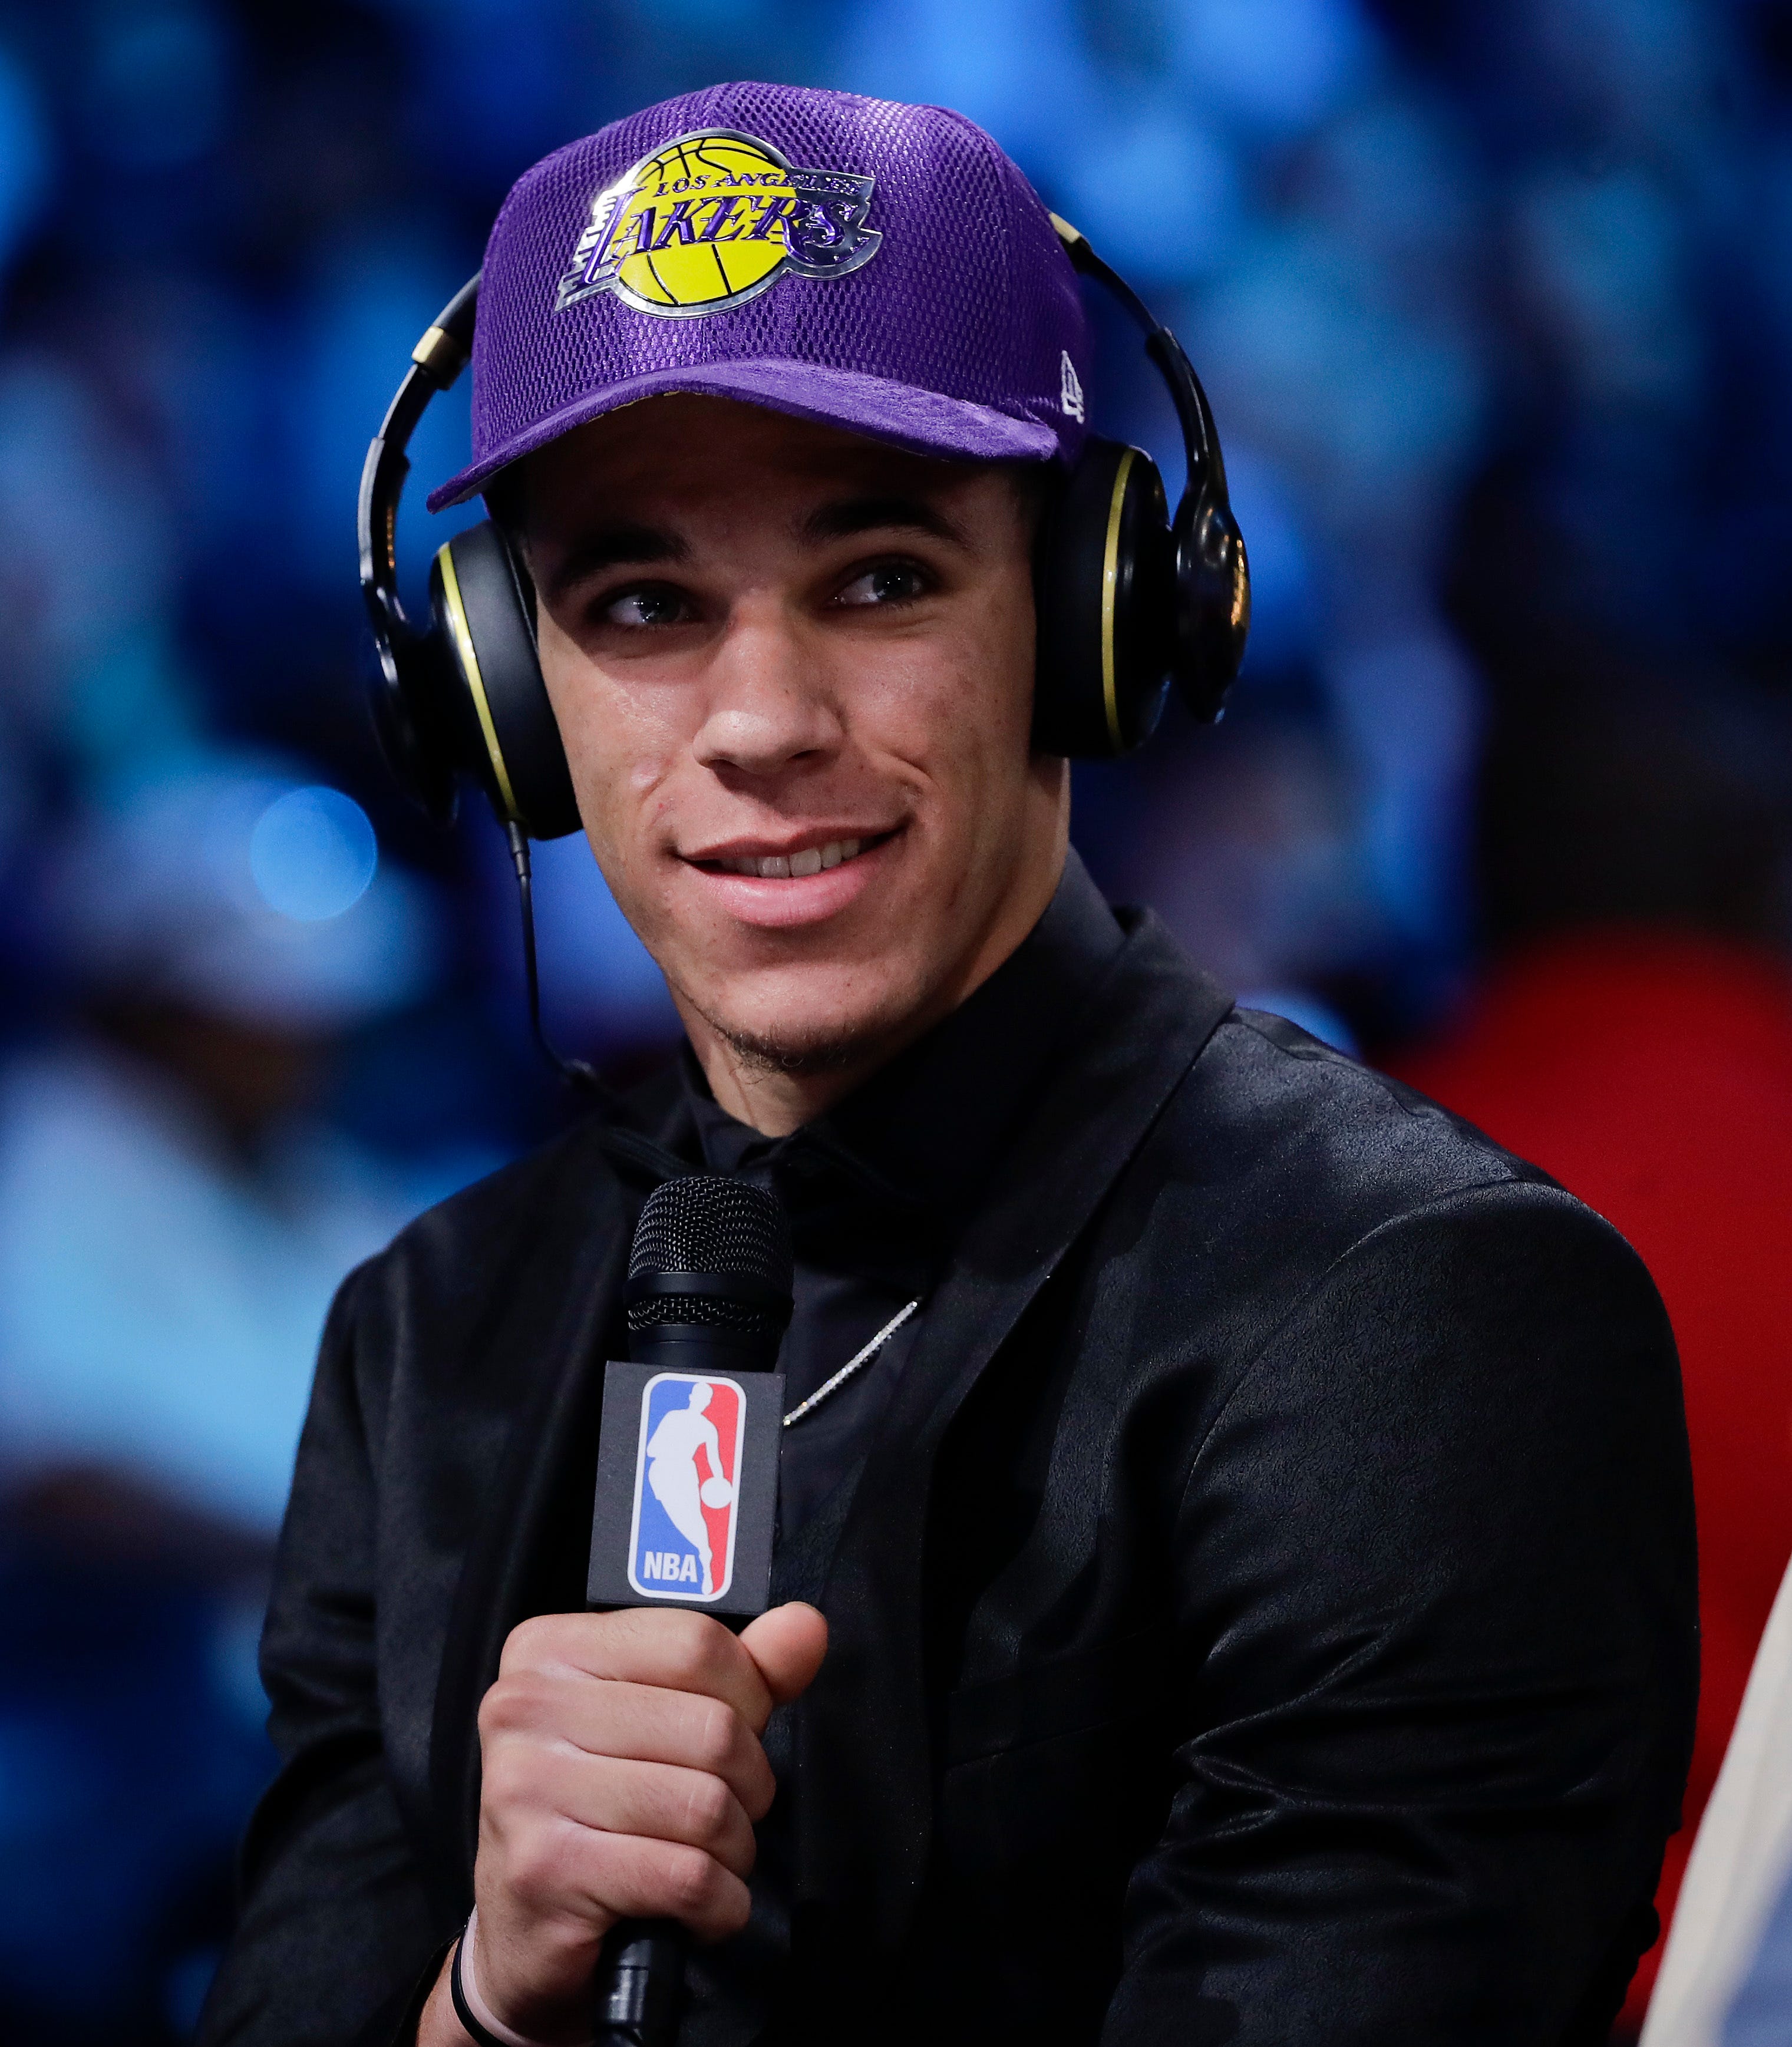 Family affair: Lakers get Lonzo Ball and dad with No. 2 pick